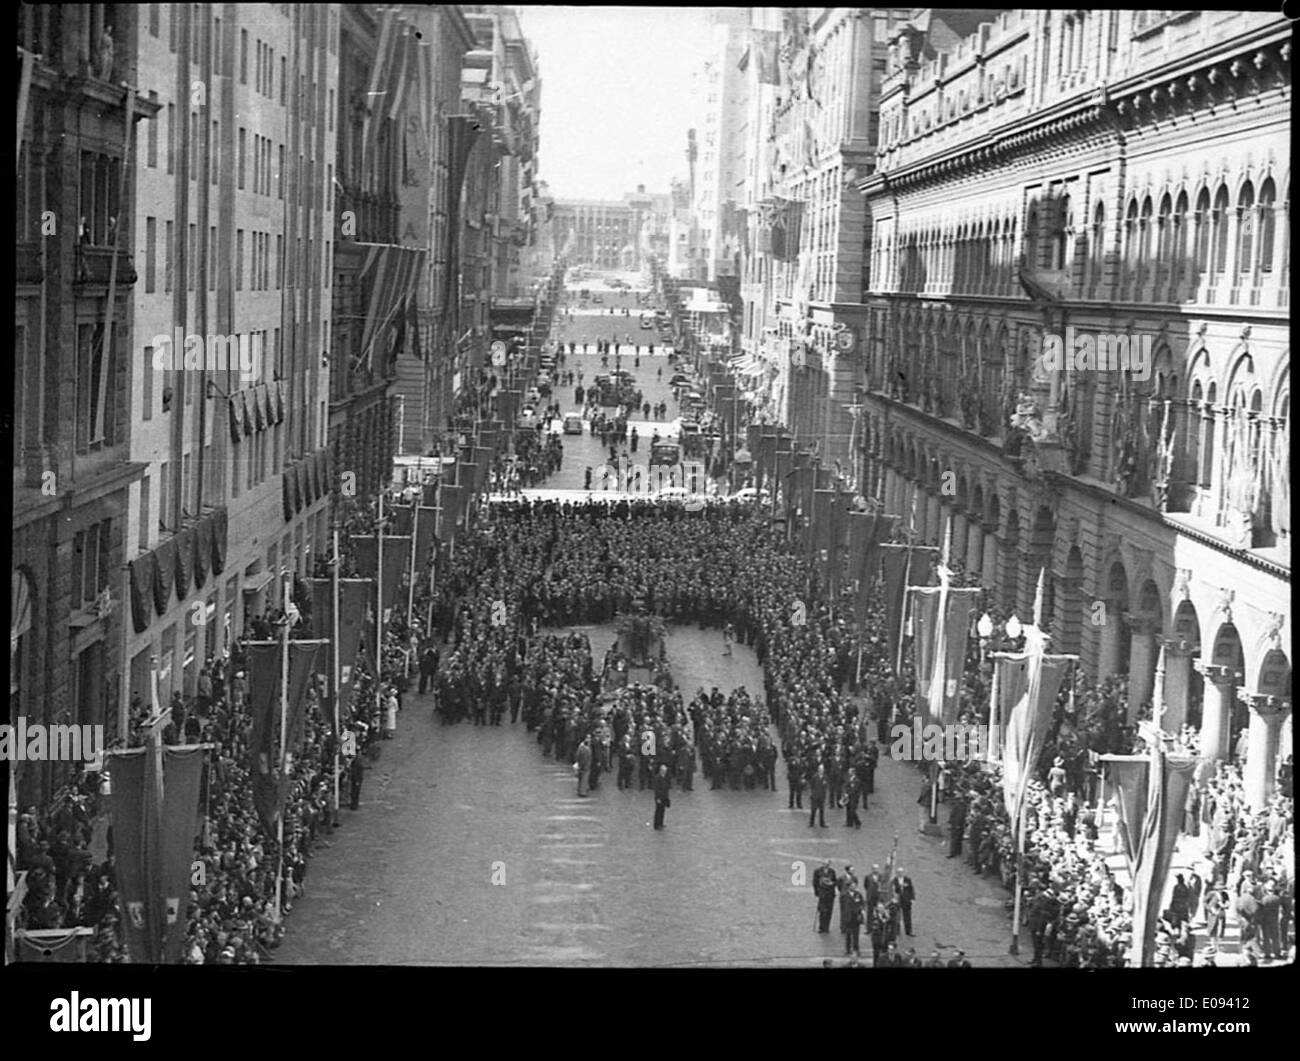 New Zealand contingent at 1937 Anzac Day commemoration, April 25, 1937 Stock Photo